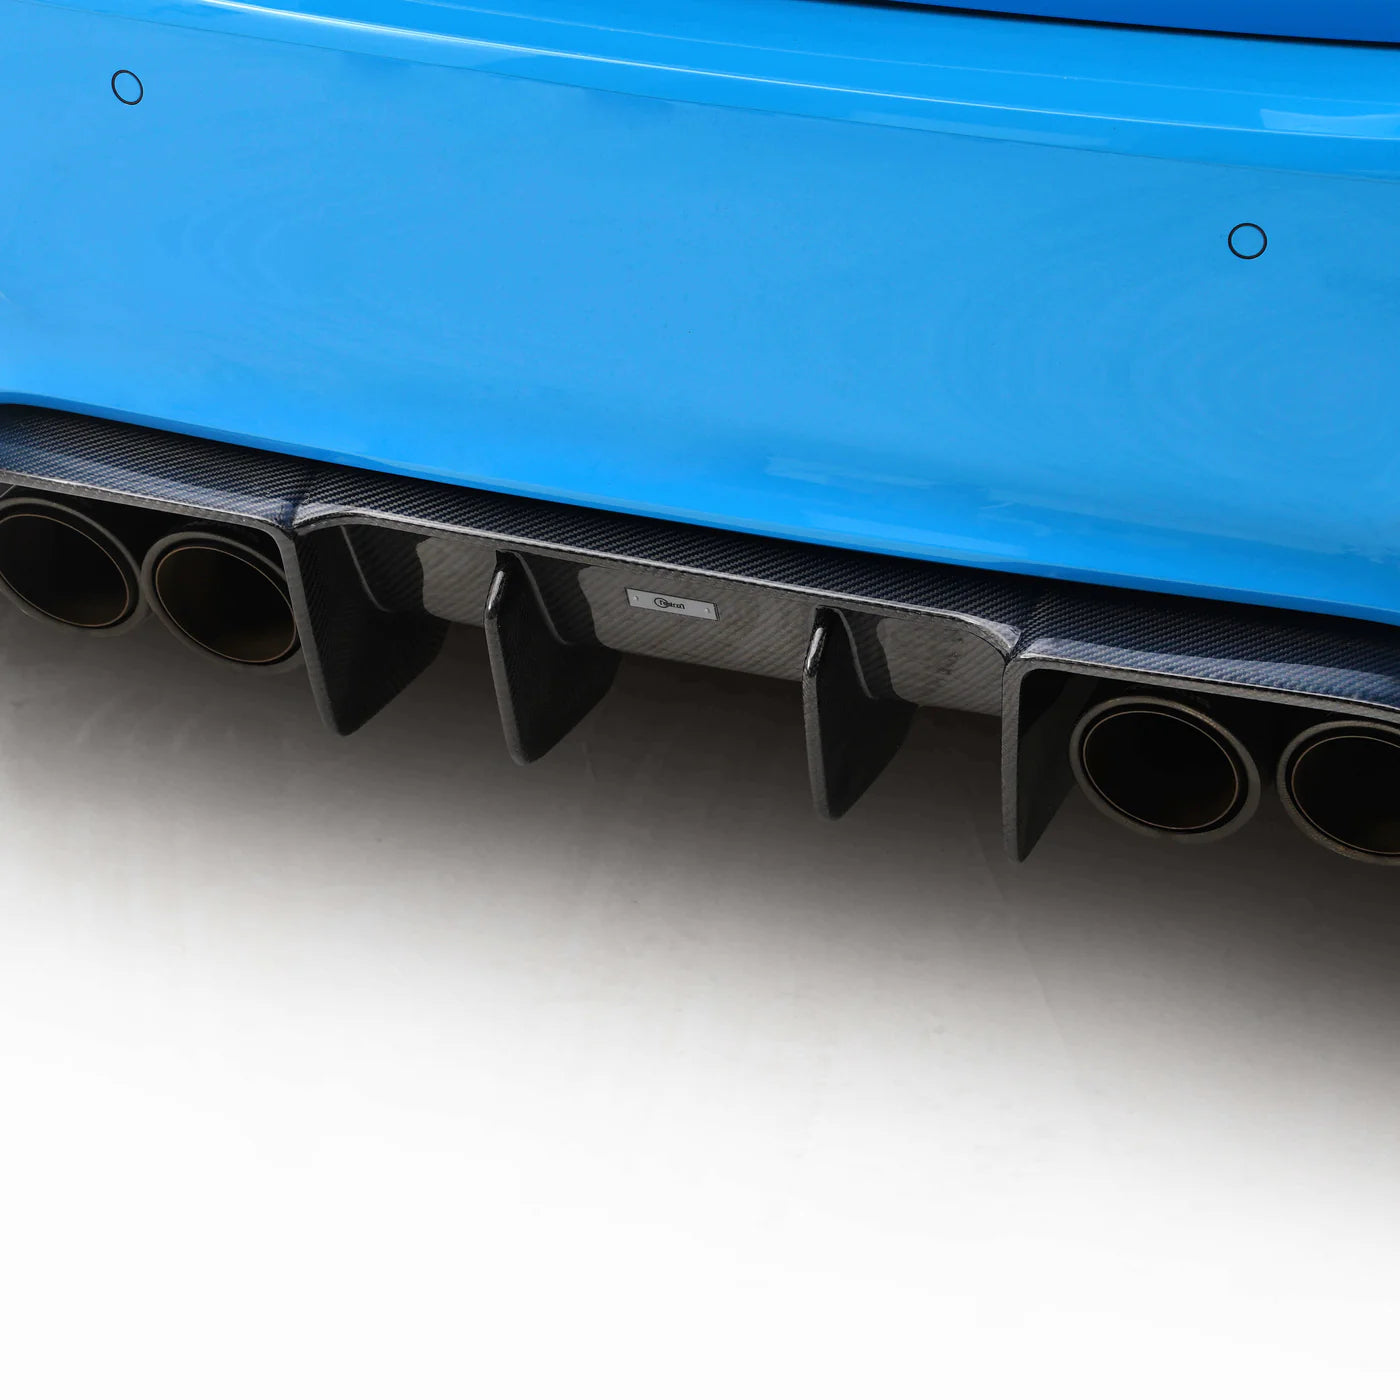 ADRO rear diffuser in Carbon voor M3/M4